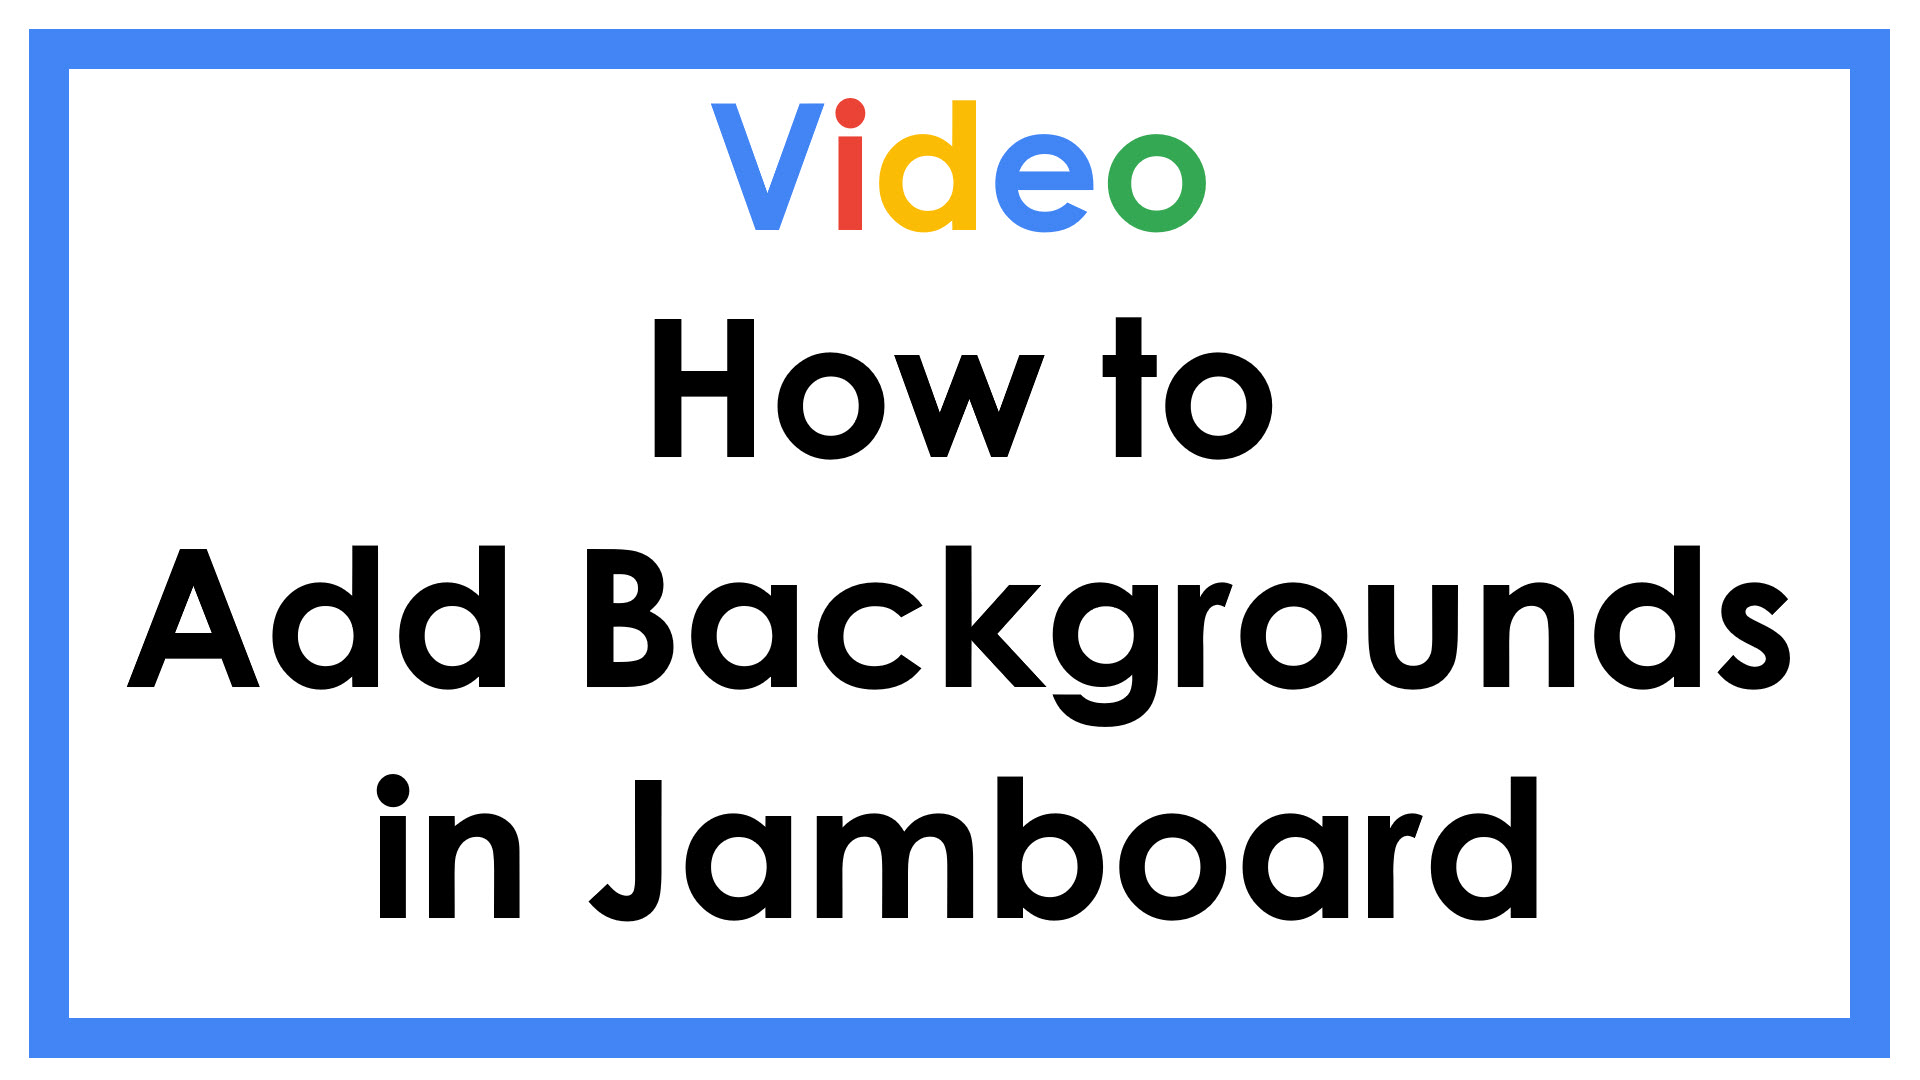 Hot to Add Backgrounds in Jamboard